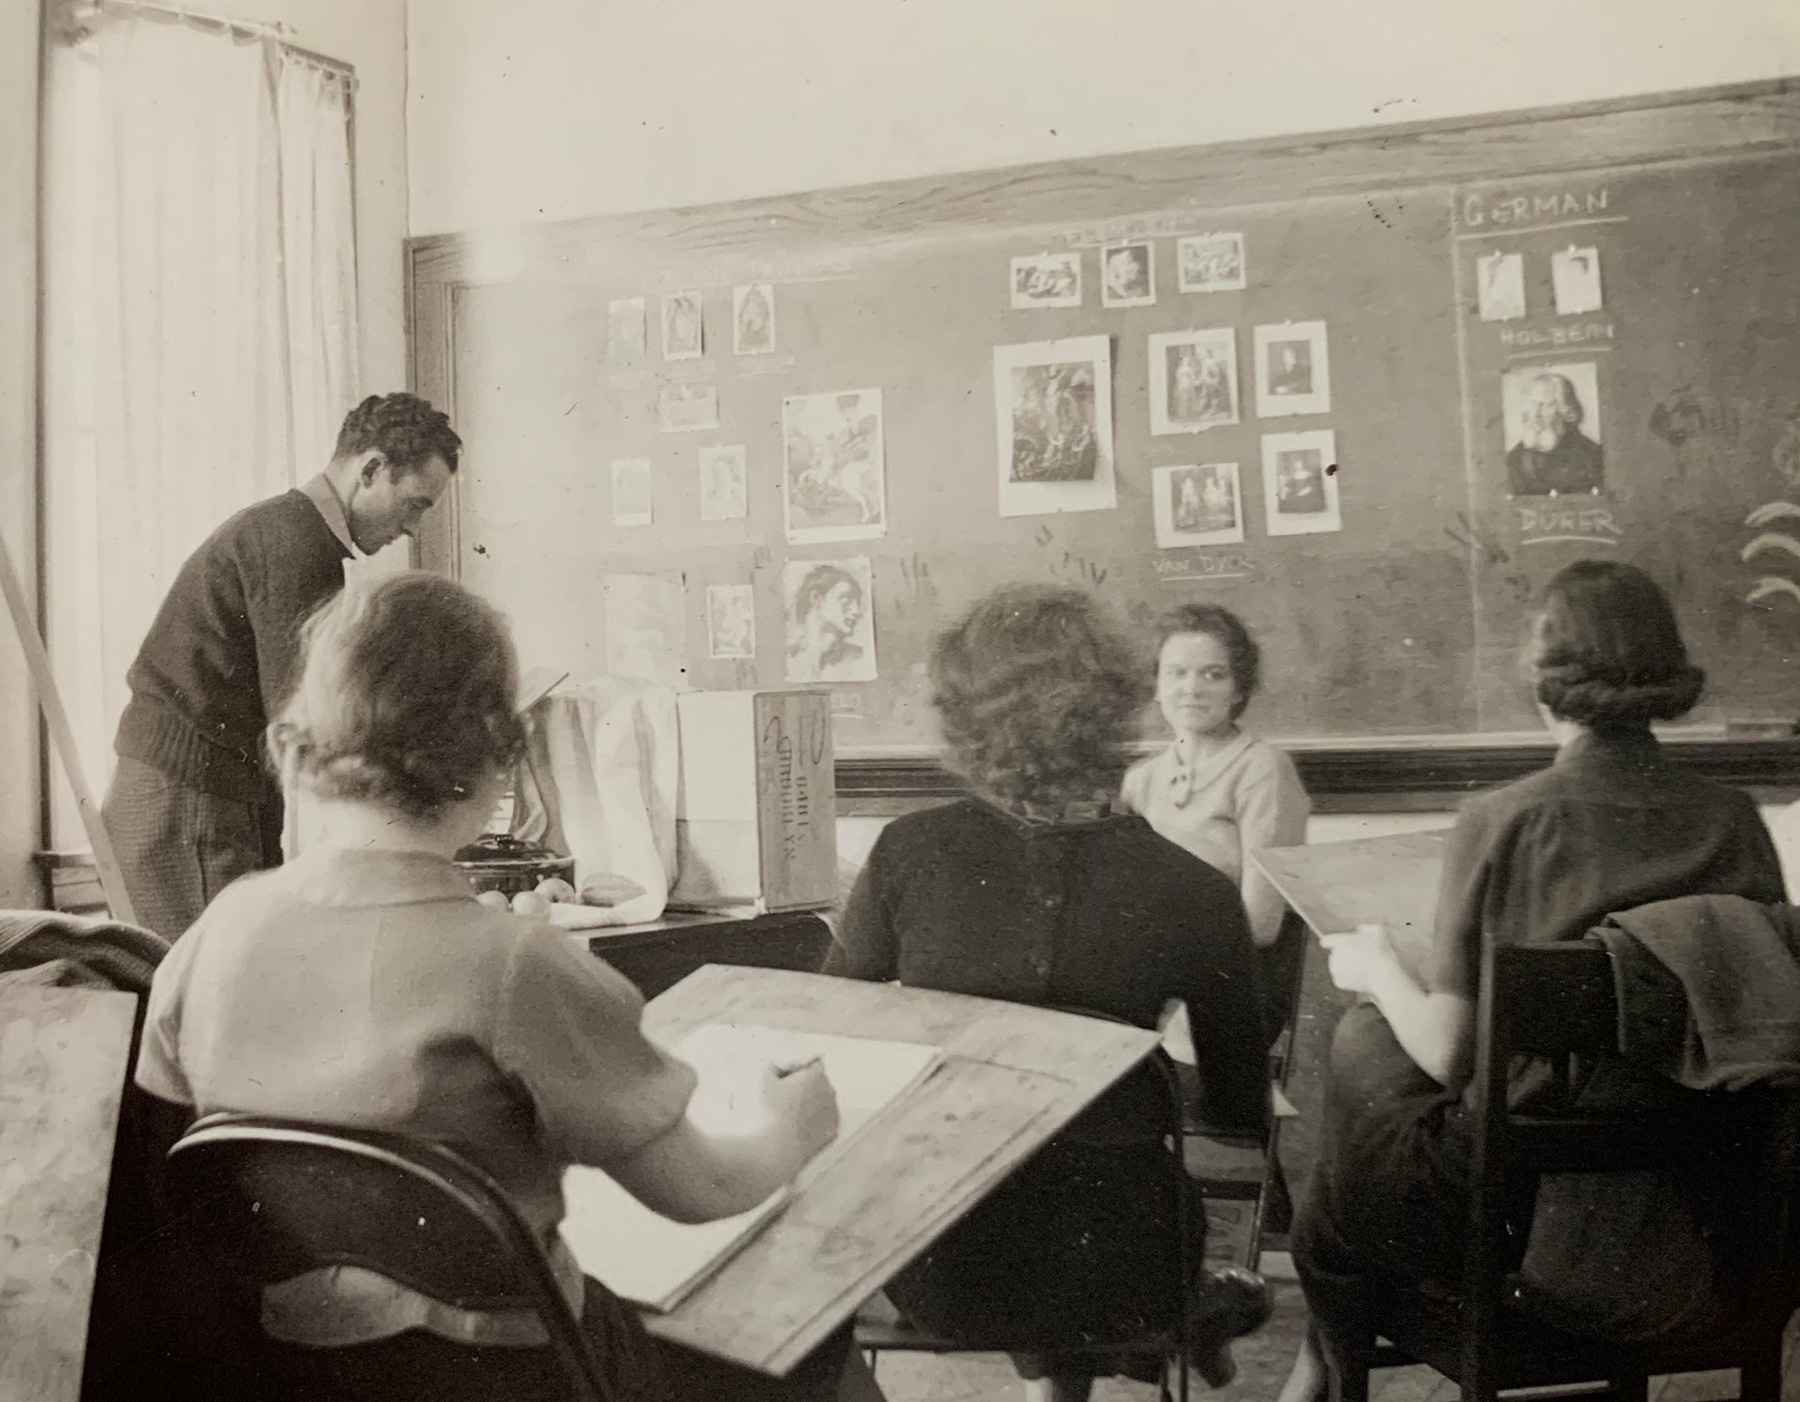 Black and white archival photograph of students drawing in an art class.